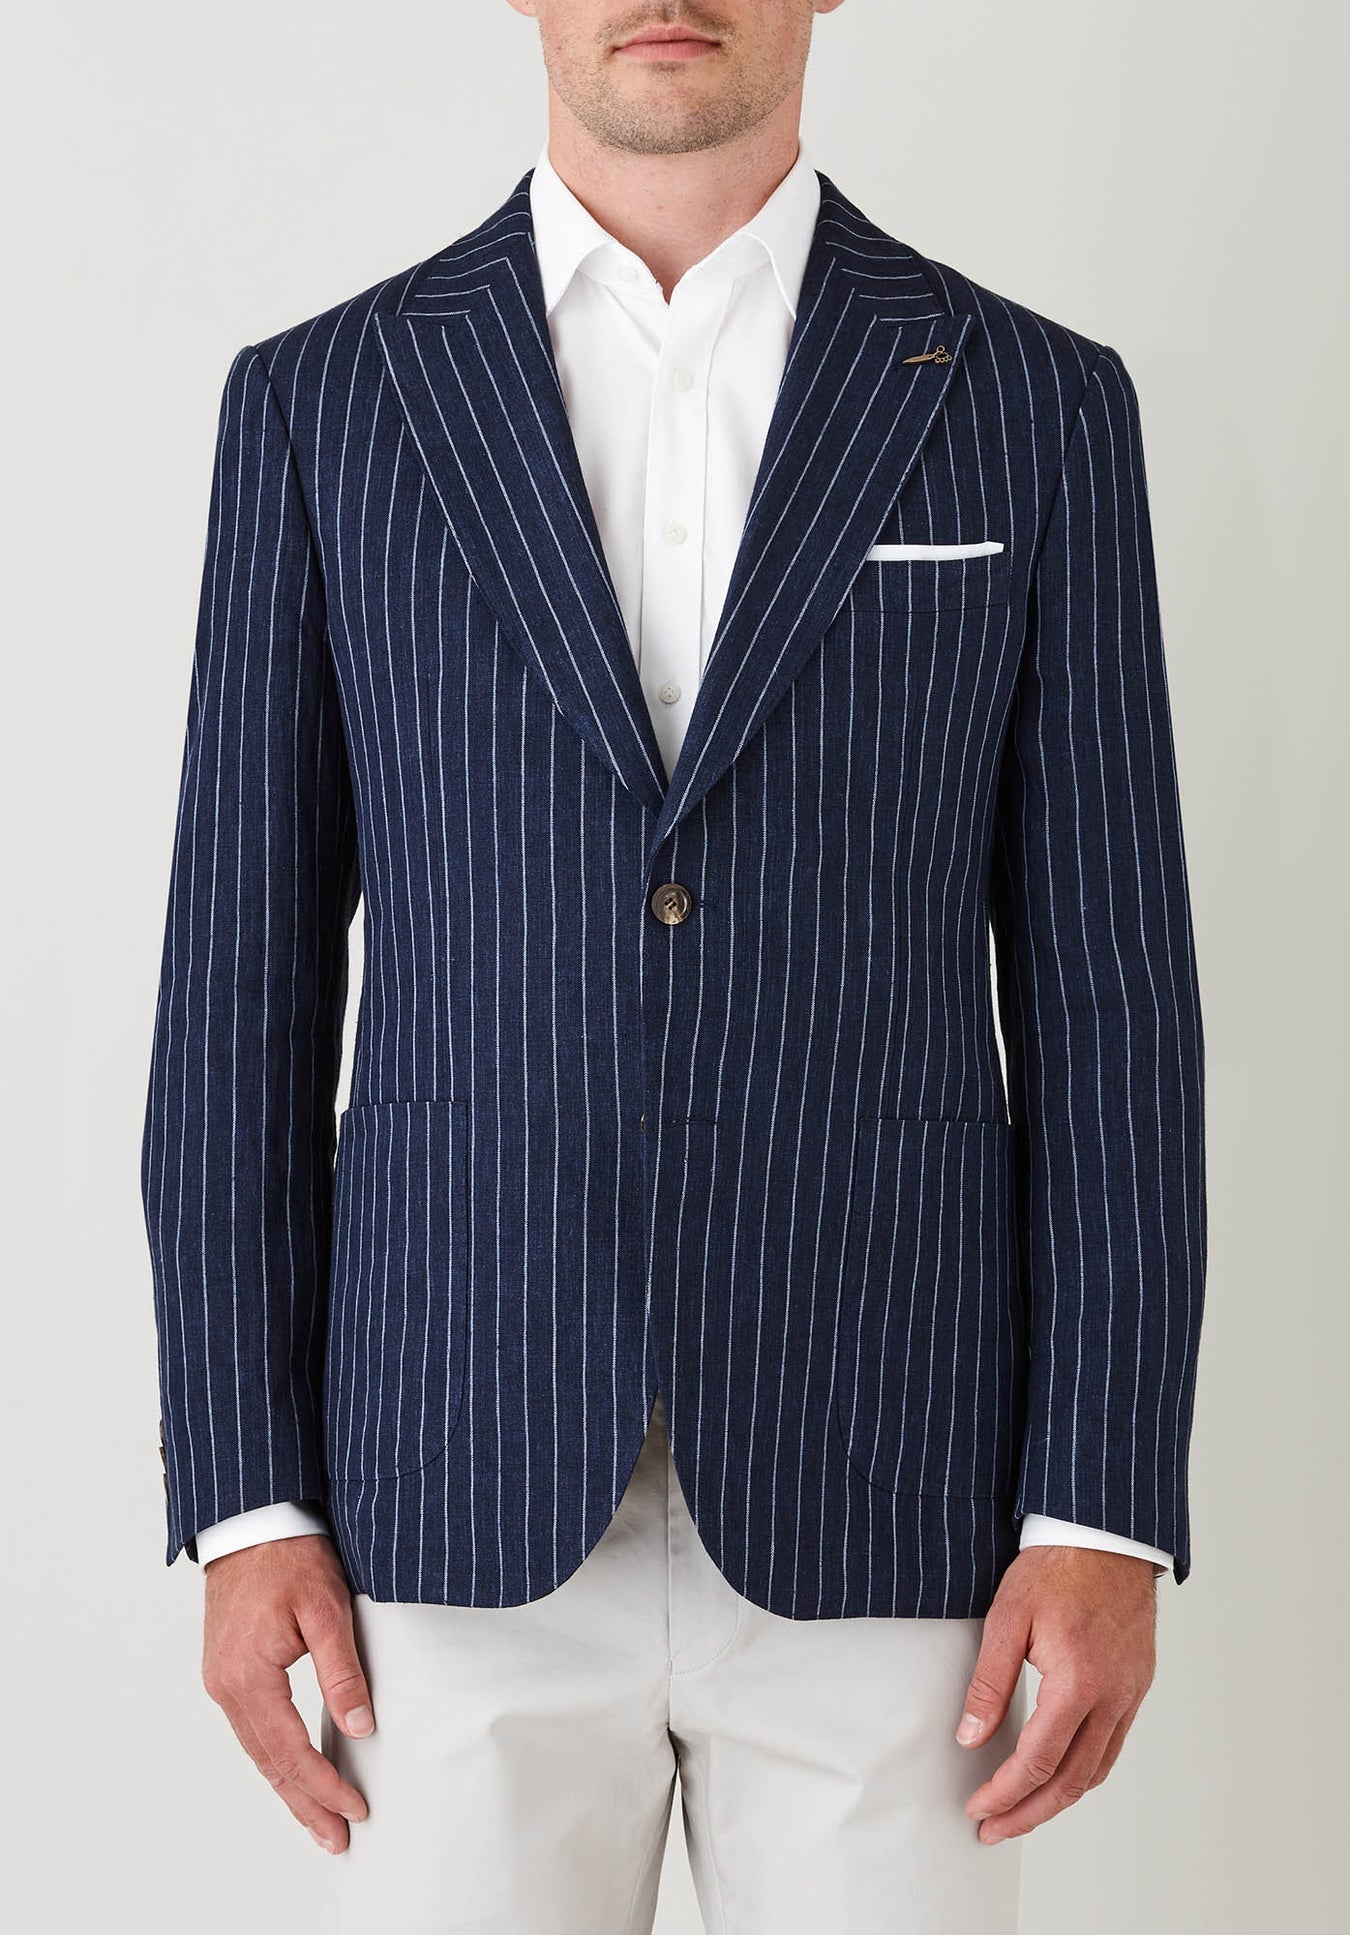 Lascar Jacket FJO960  https://harrysformenswear.com.au/products/copy-of-lascar-jacket  Tailored Fit Cruise Striped Linen Sports Jacket FJO960 The tailored fit Cruise sports jacket features patch pockets and half lining for Summer. This casual classic navy linen blazer features a wide stripe in lighter blue that is woven by the famed Italian mill Alfa-Fi. A stylish sports jacket that can be worn with the …